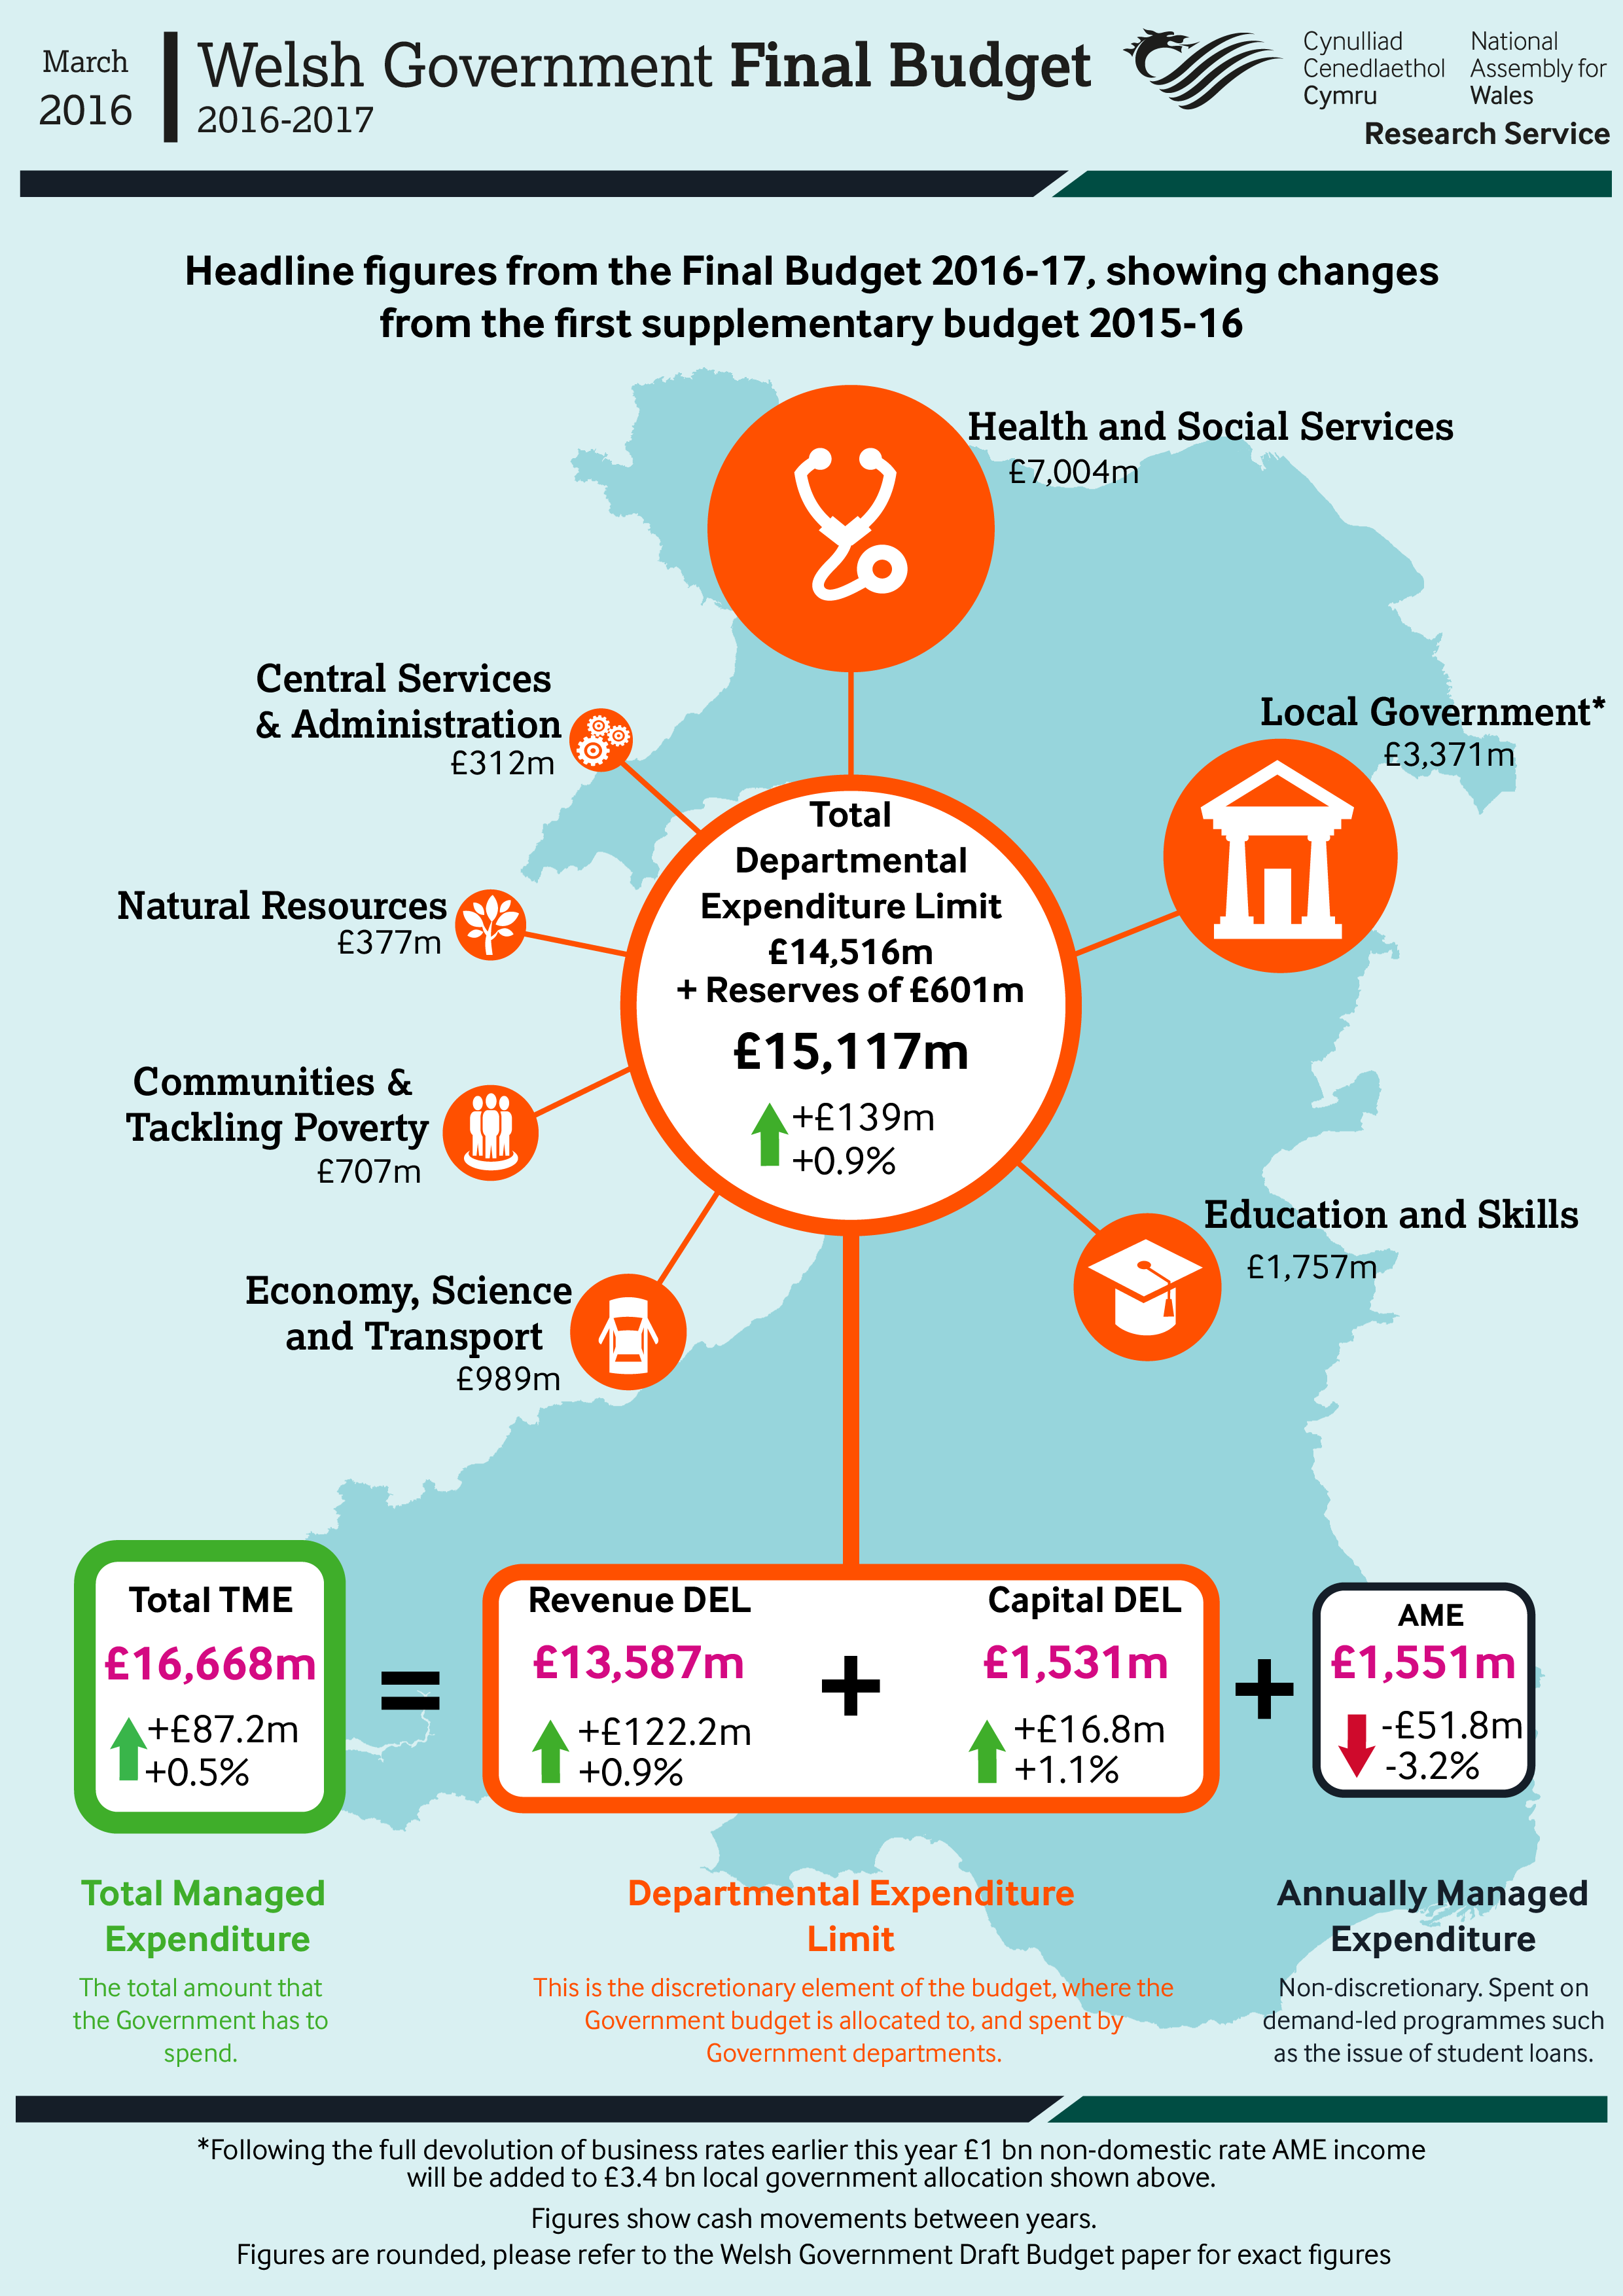 infographic showing the headline figures from the Welsh Government Final Budget 2016-17.